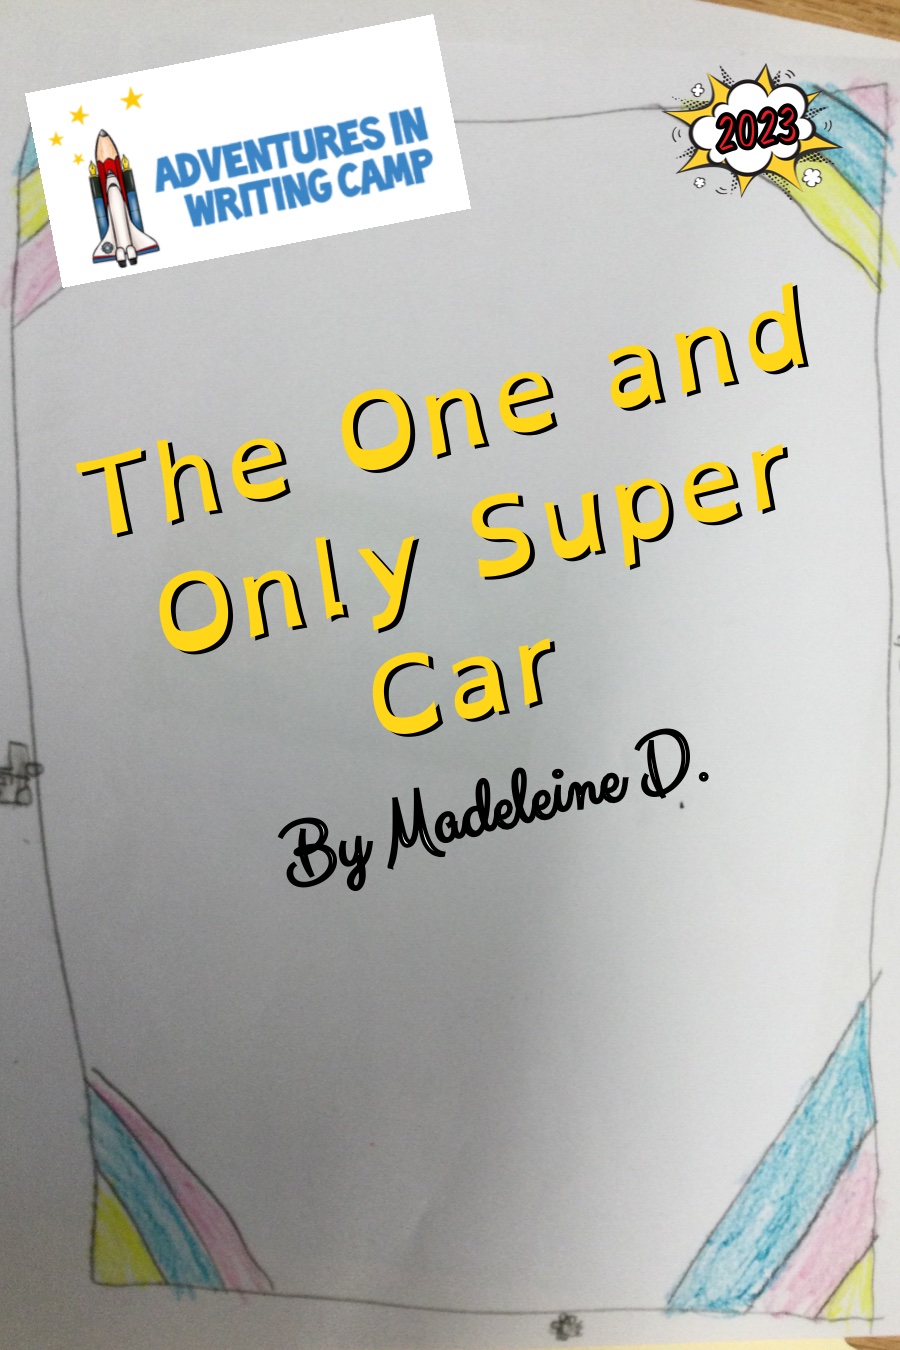 The One and Only Super Car by Madeleine D.